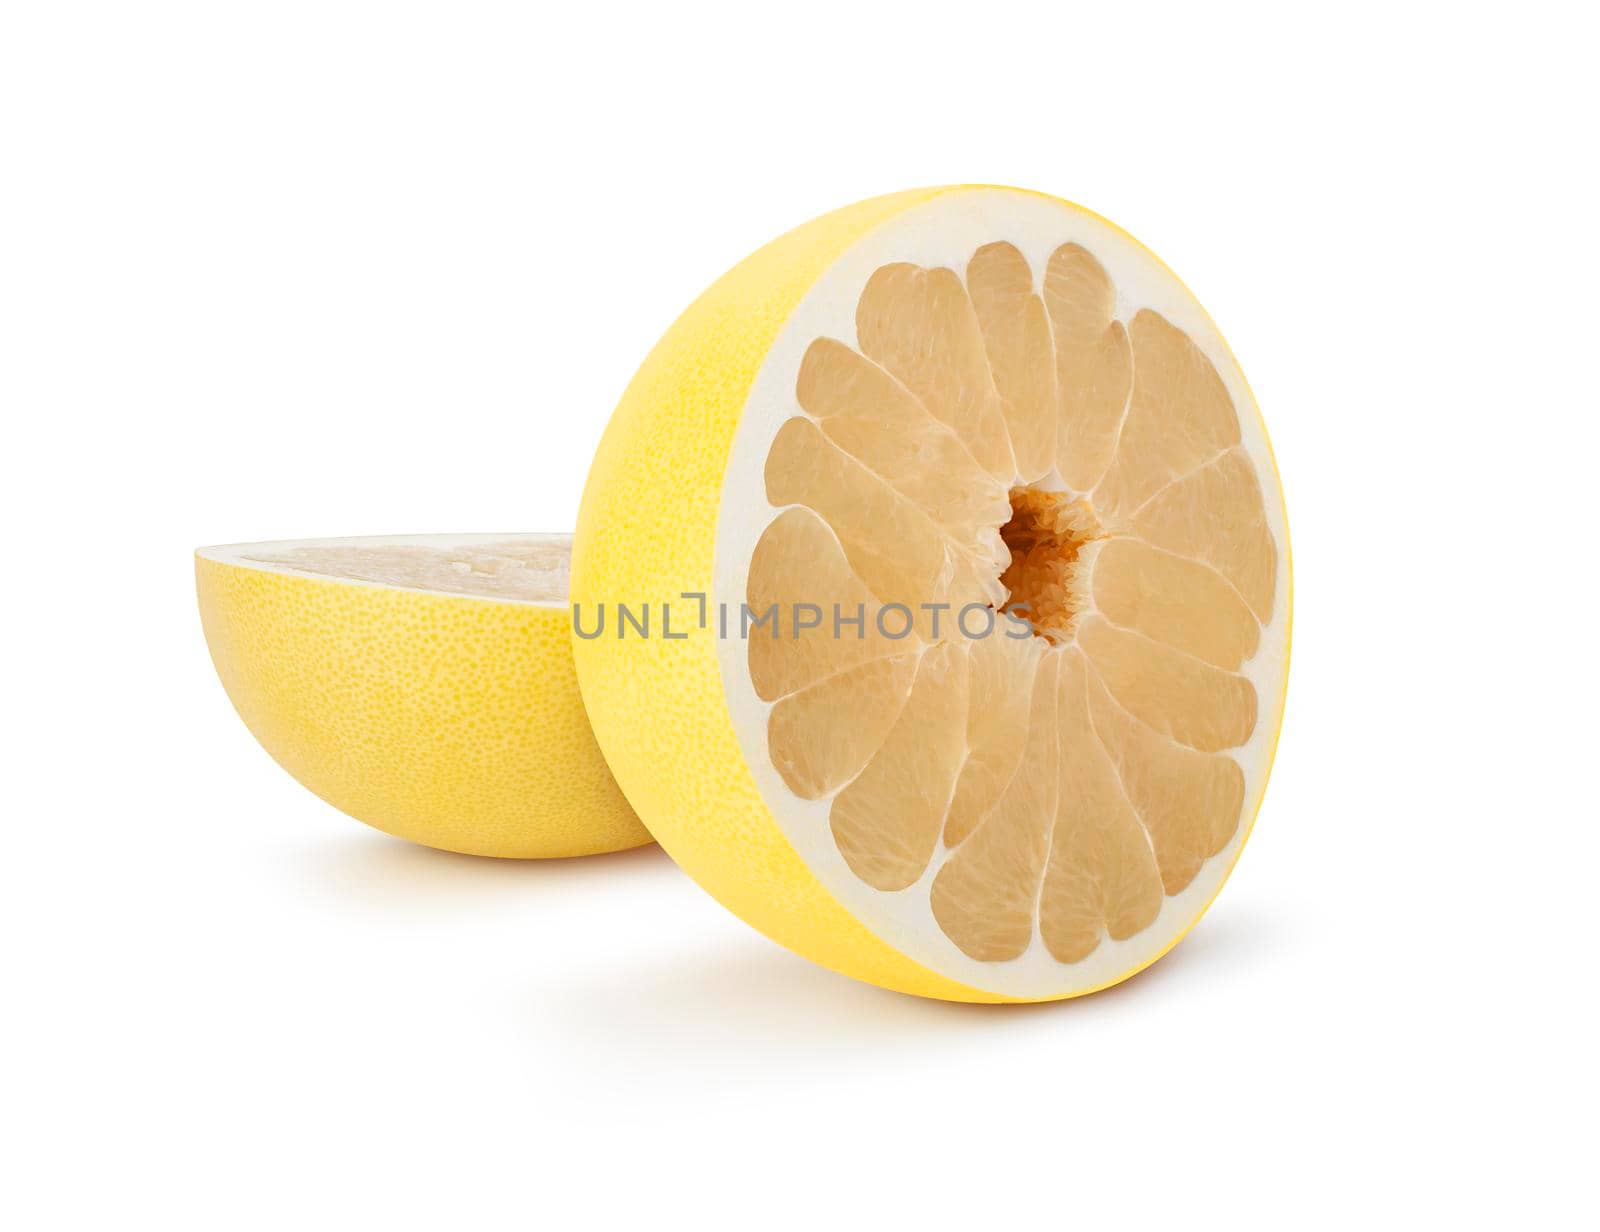 Pamela citrus fruit one cut in half isolated on white background. Clipping Path.